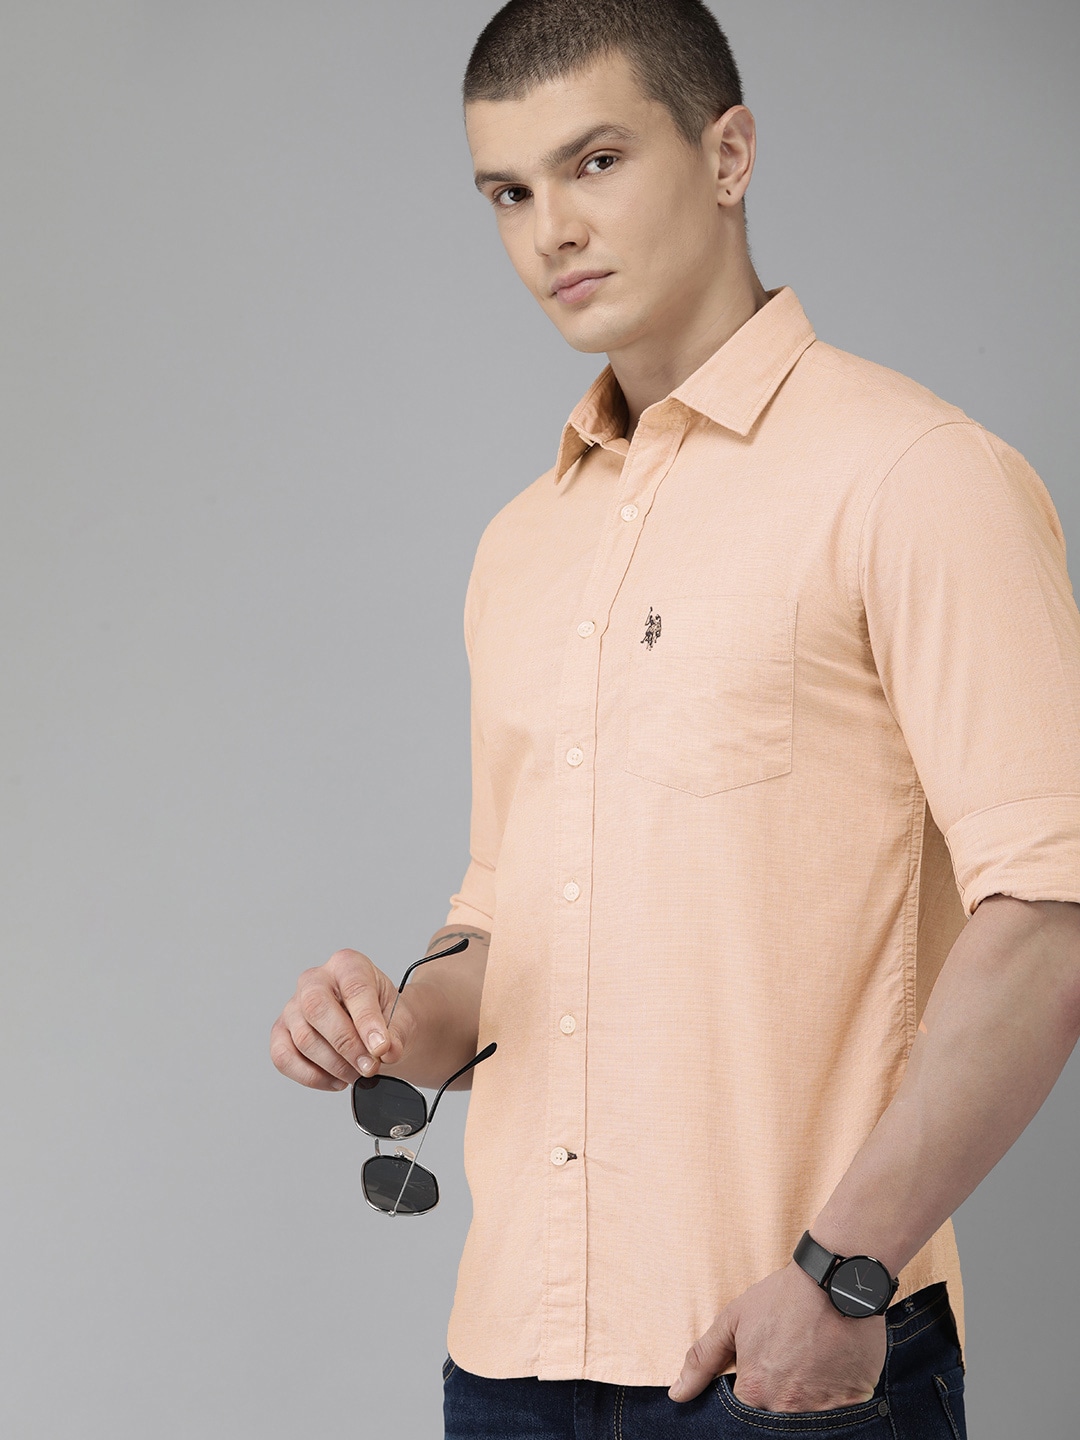 U S Polo Assn Solid Tailored Fit Pure Cotton Casual Shirt